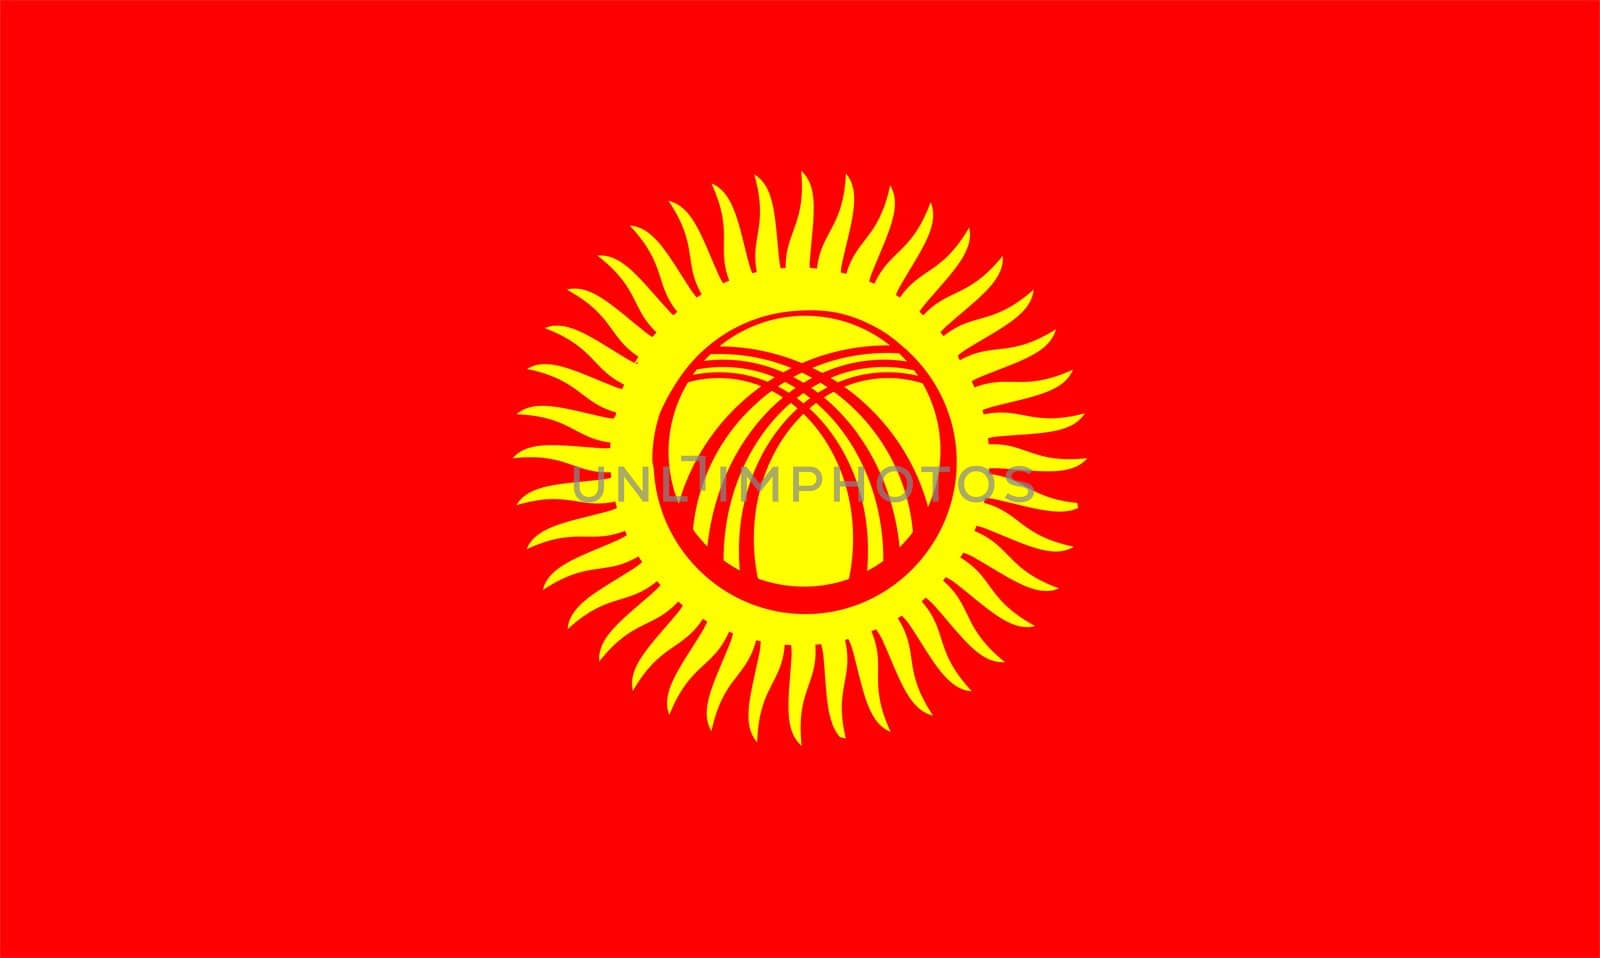 2D illustration of the flag of Kyrgyzstan